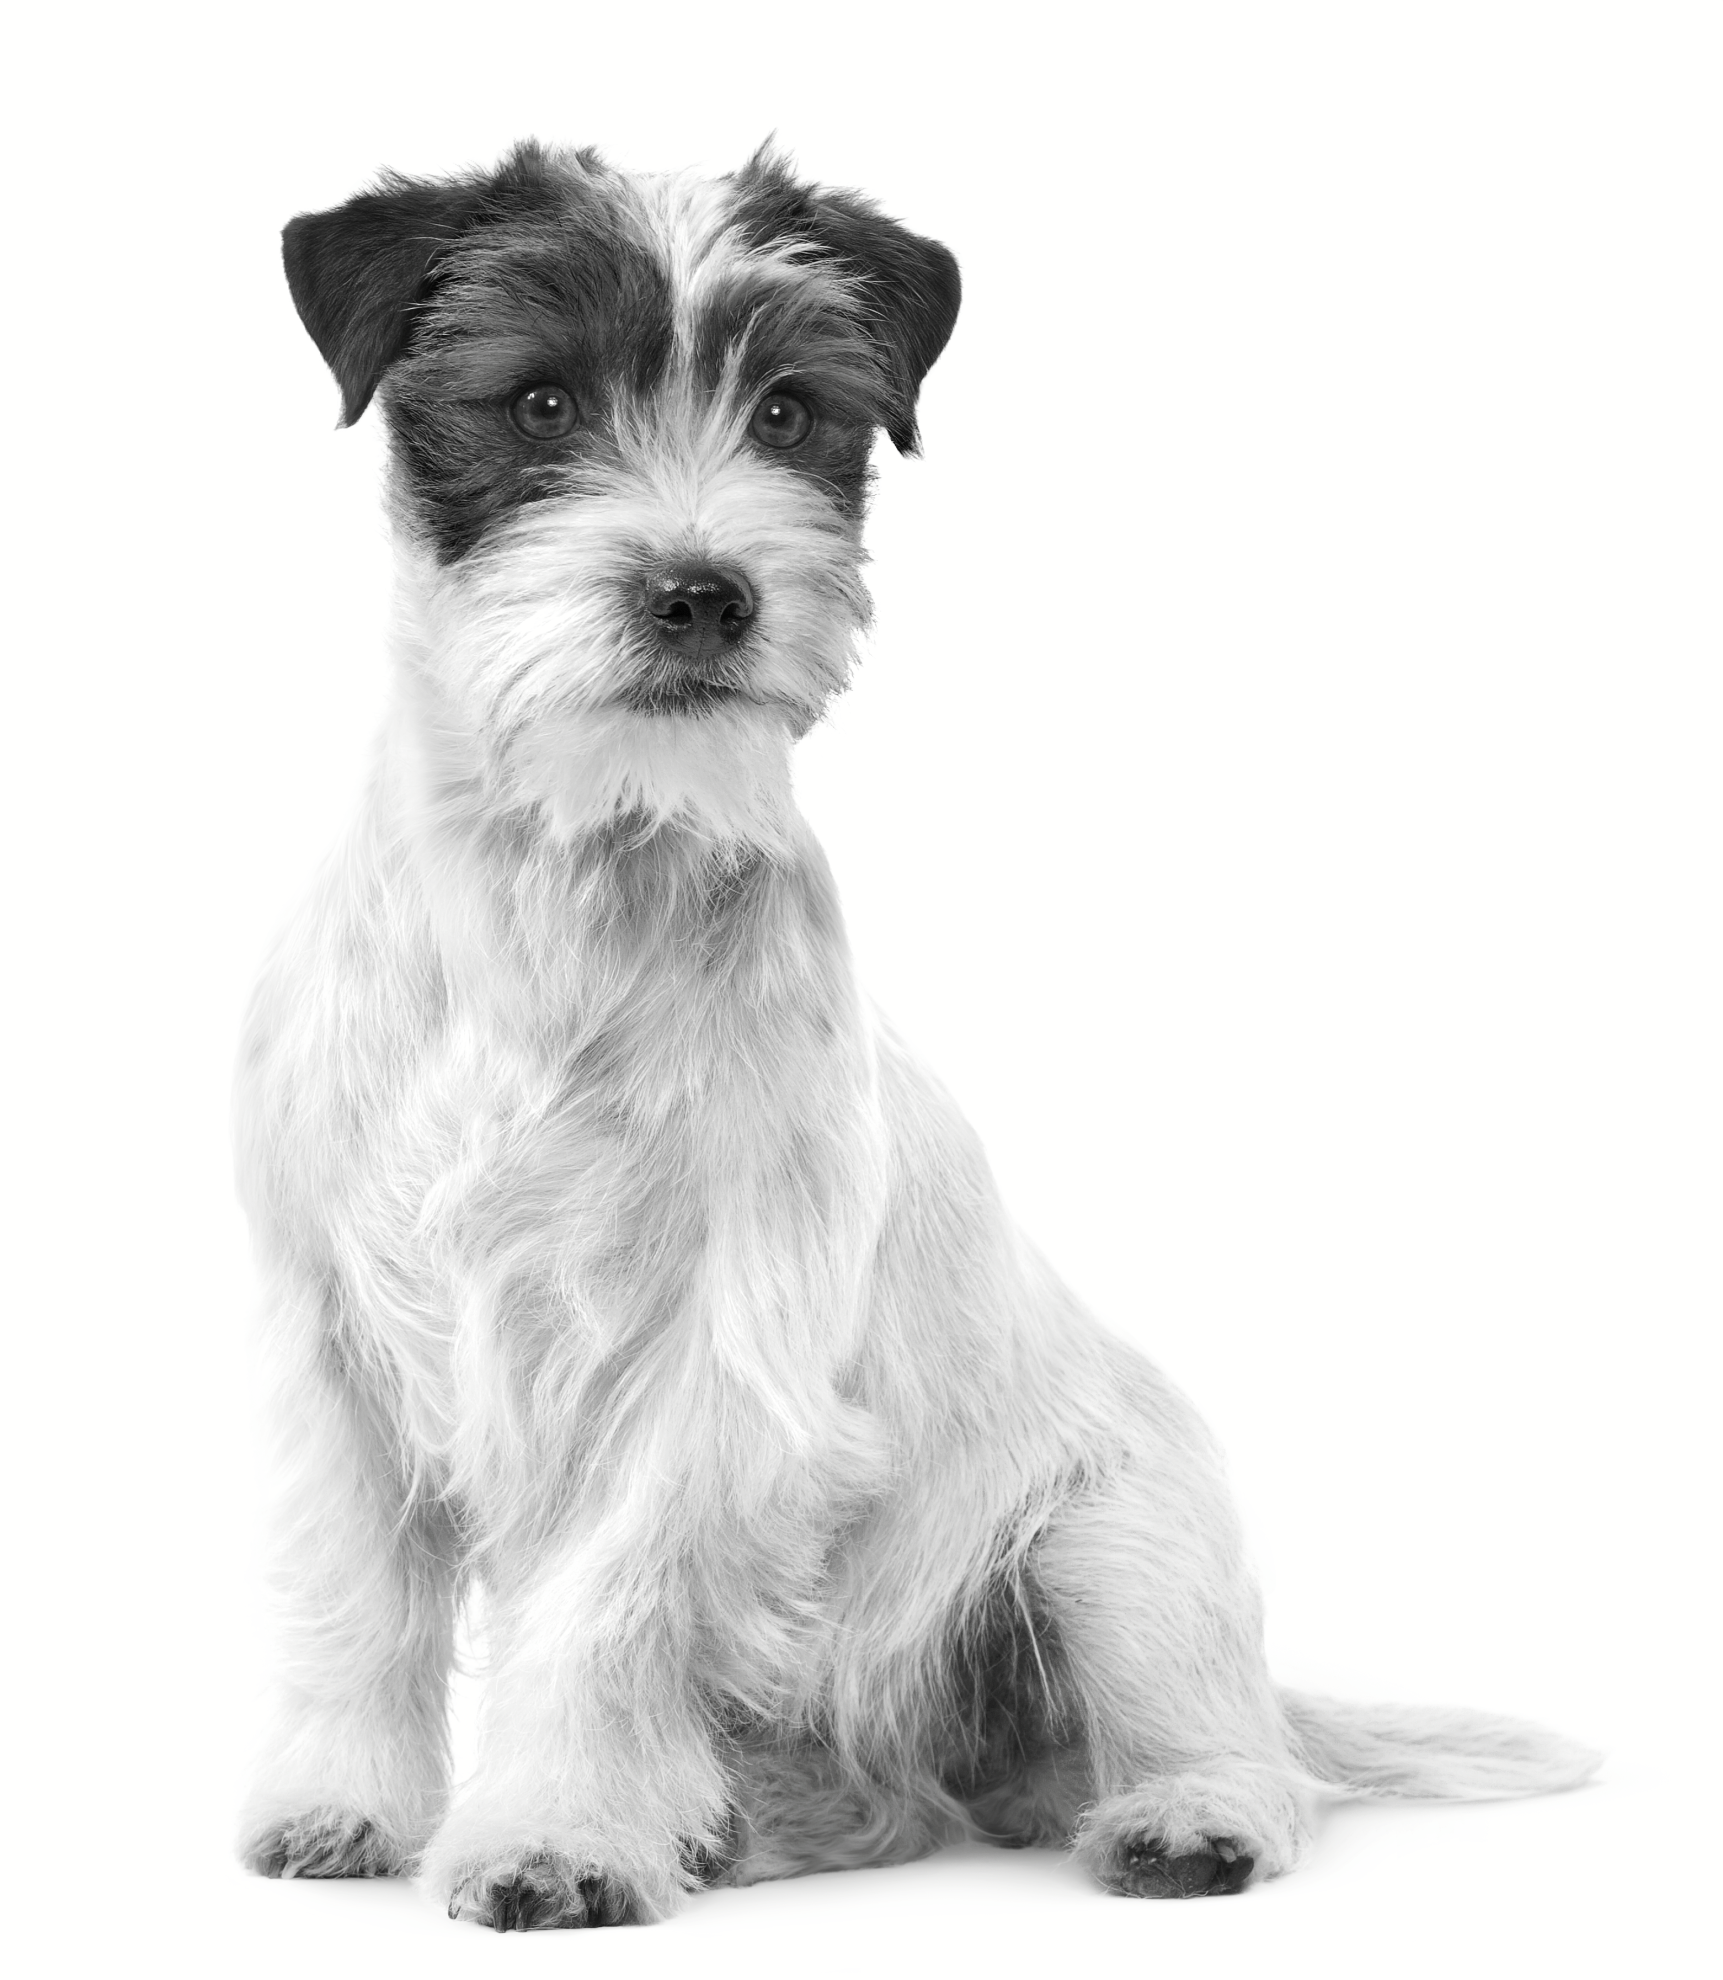 Black and white Jack Russel Terrier sitting